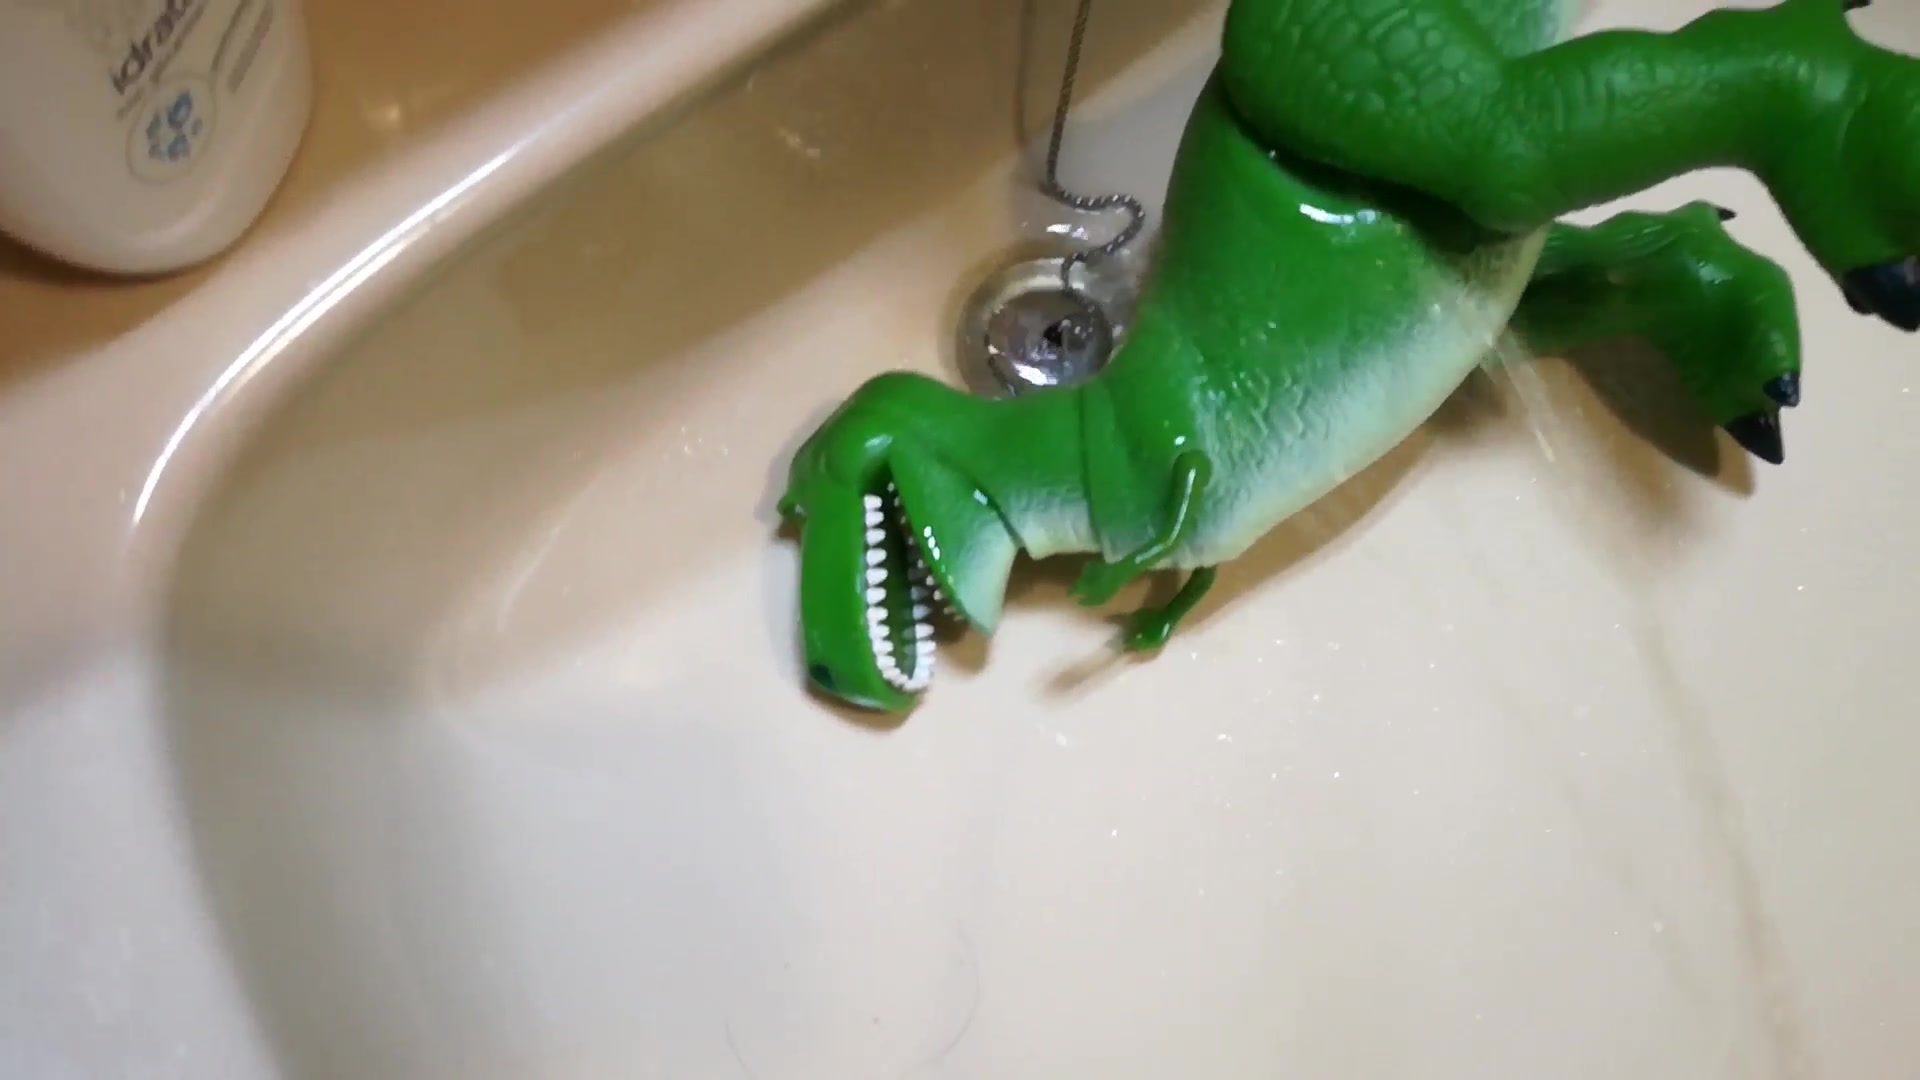 T-Rex from Toy Story gets a bath